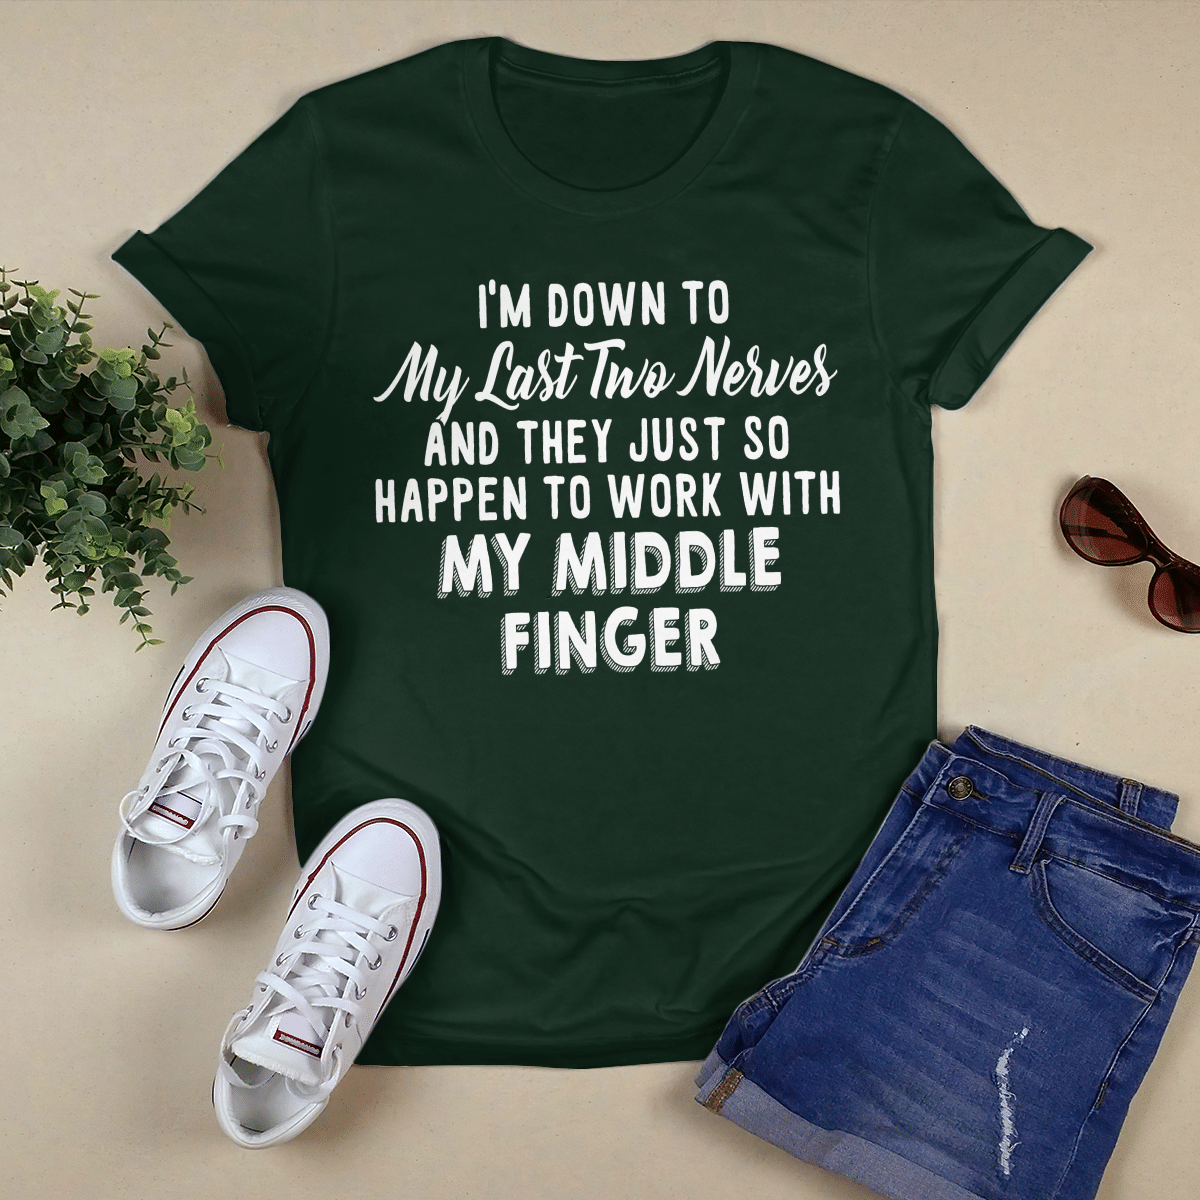 I_m Down To My Last Two Nerves shirt